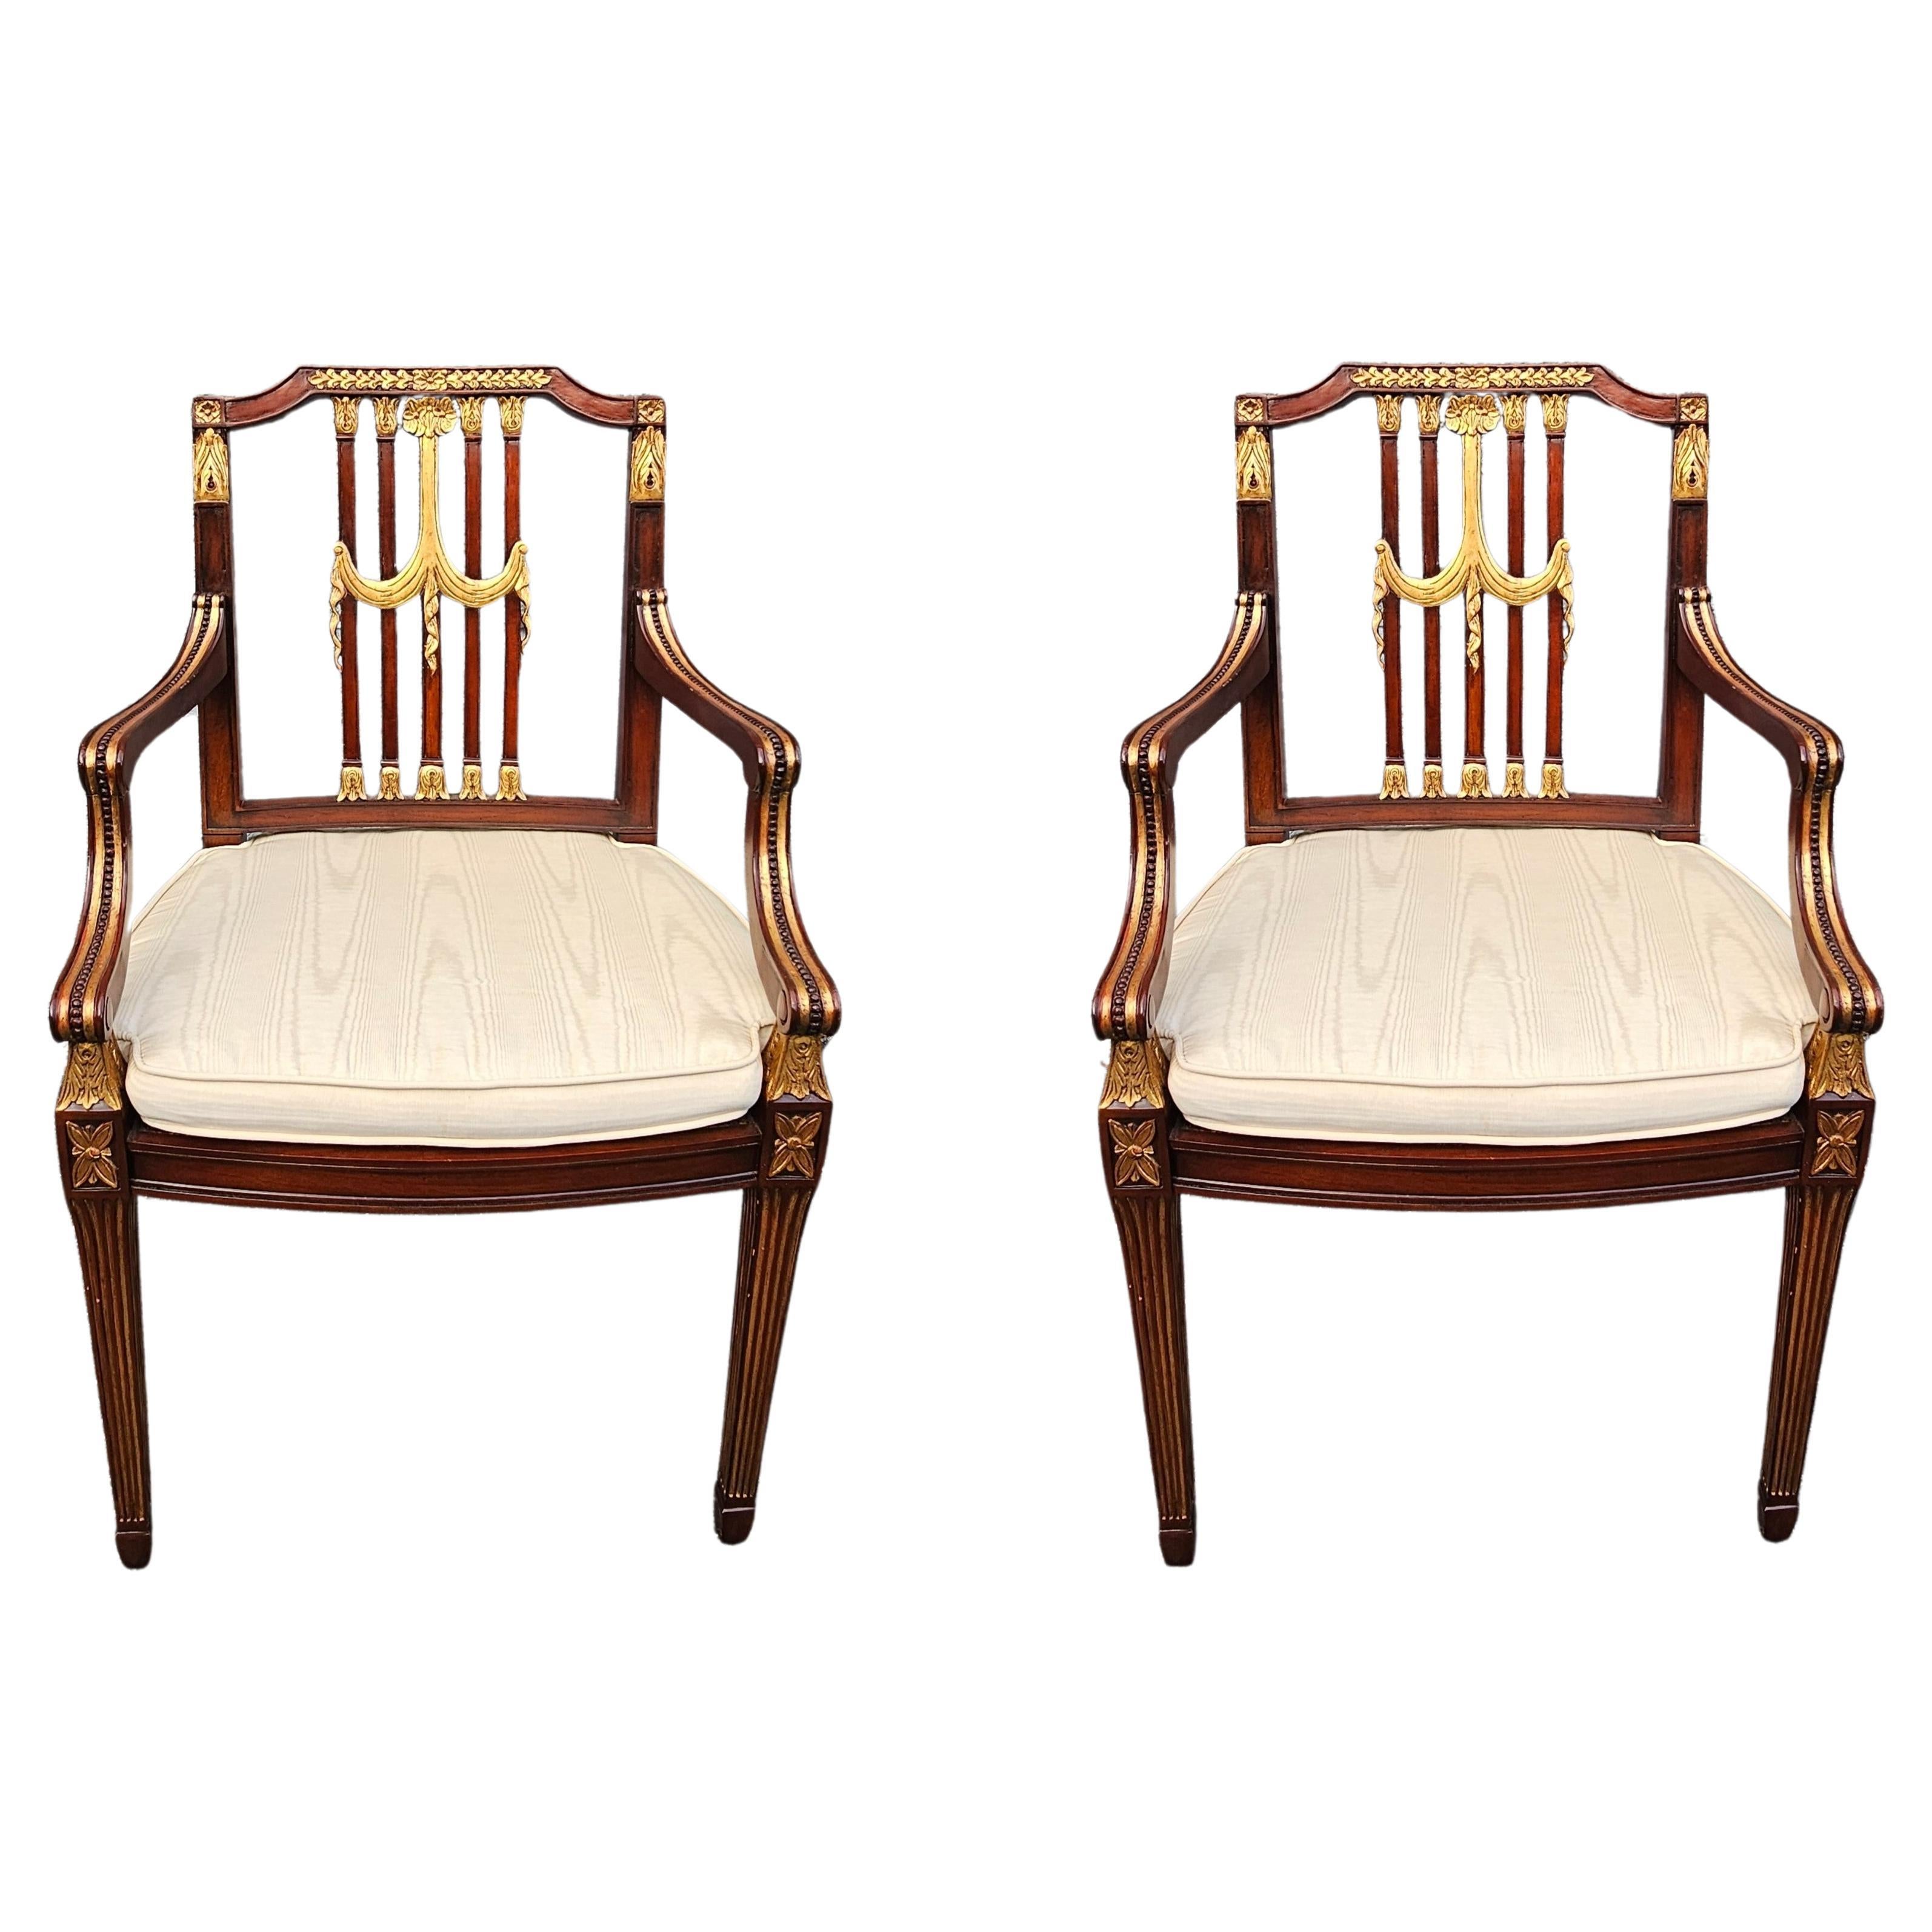 Pair Maitland Smith Parcel Gilt Mahogany & Swag Shield Back Cane Seat Armchairs For Sale